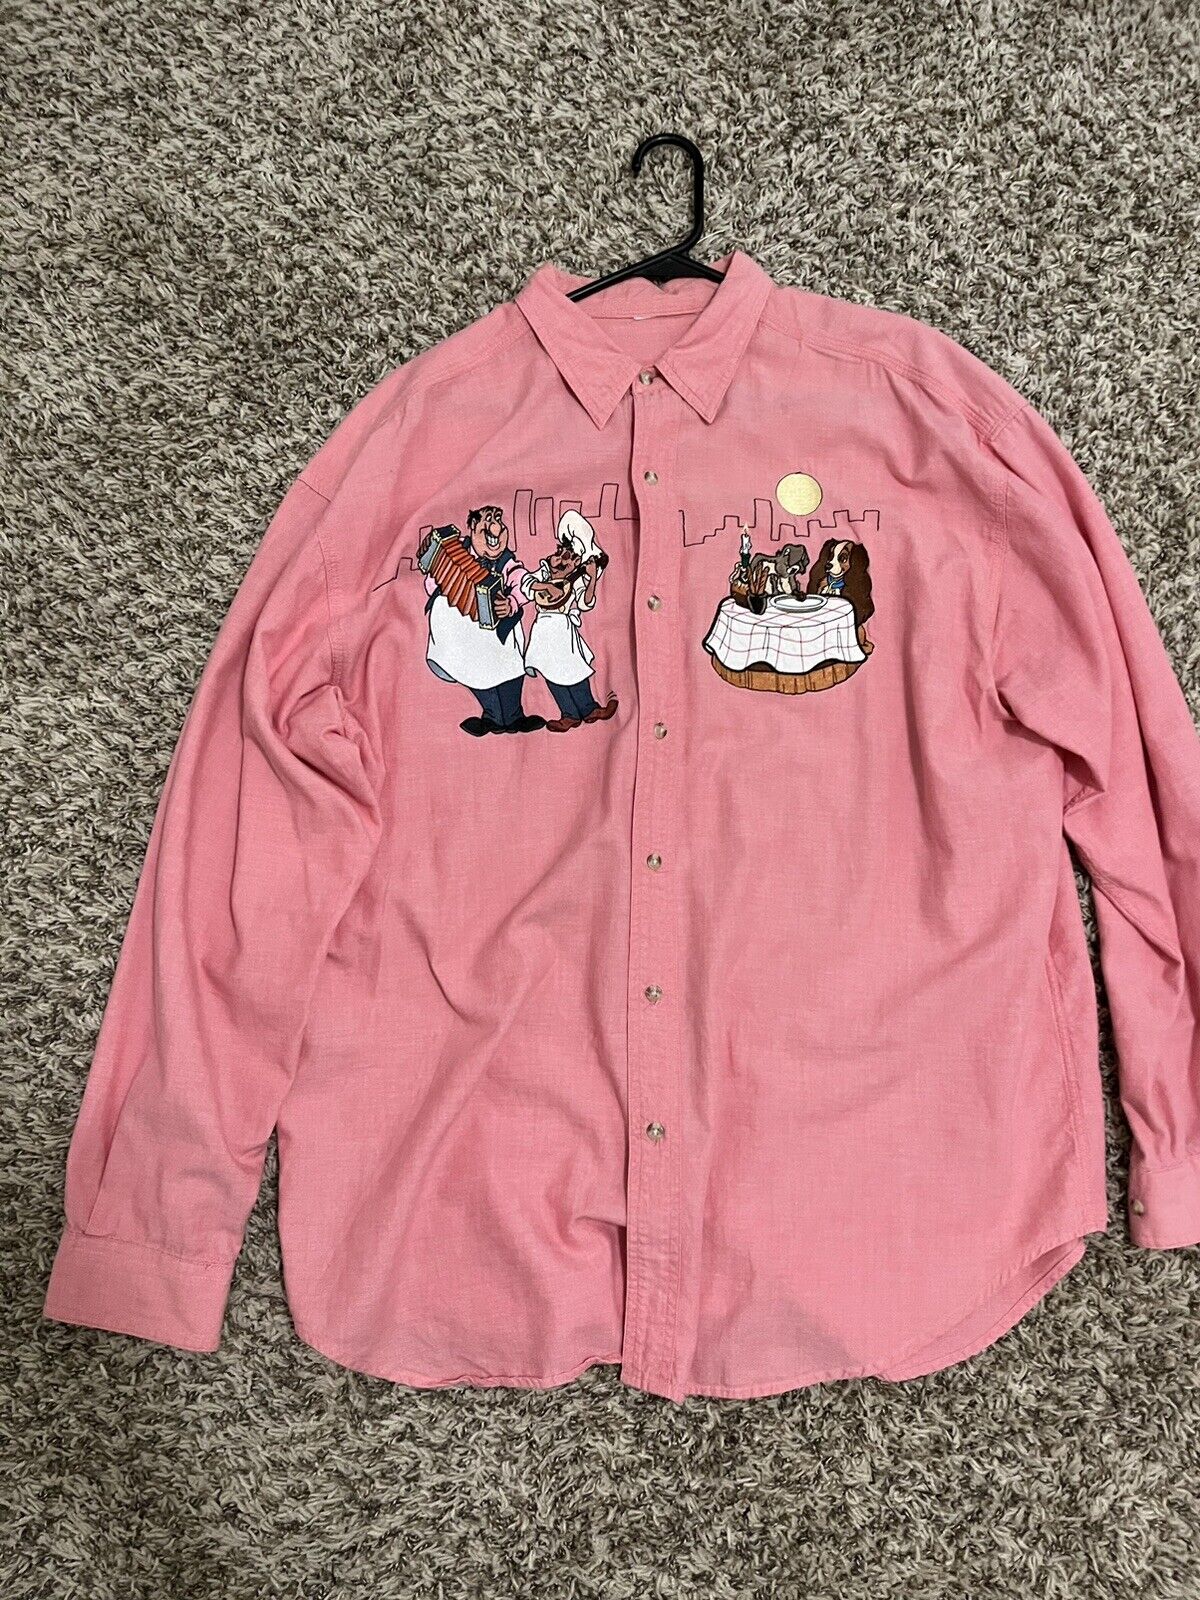 Vintage Disney Store Embroidered Lady And The Tramp Button Up. No Tag But XL